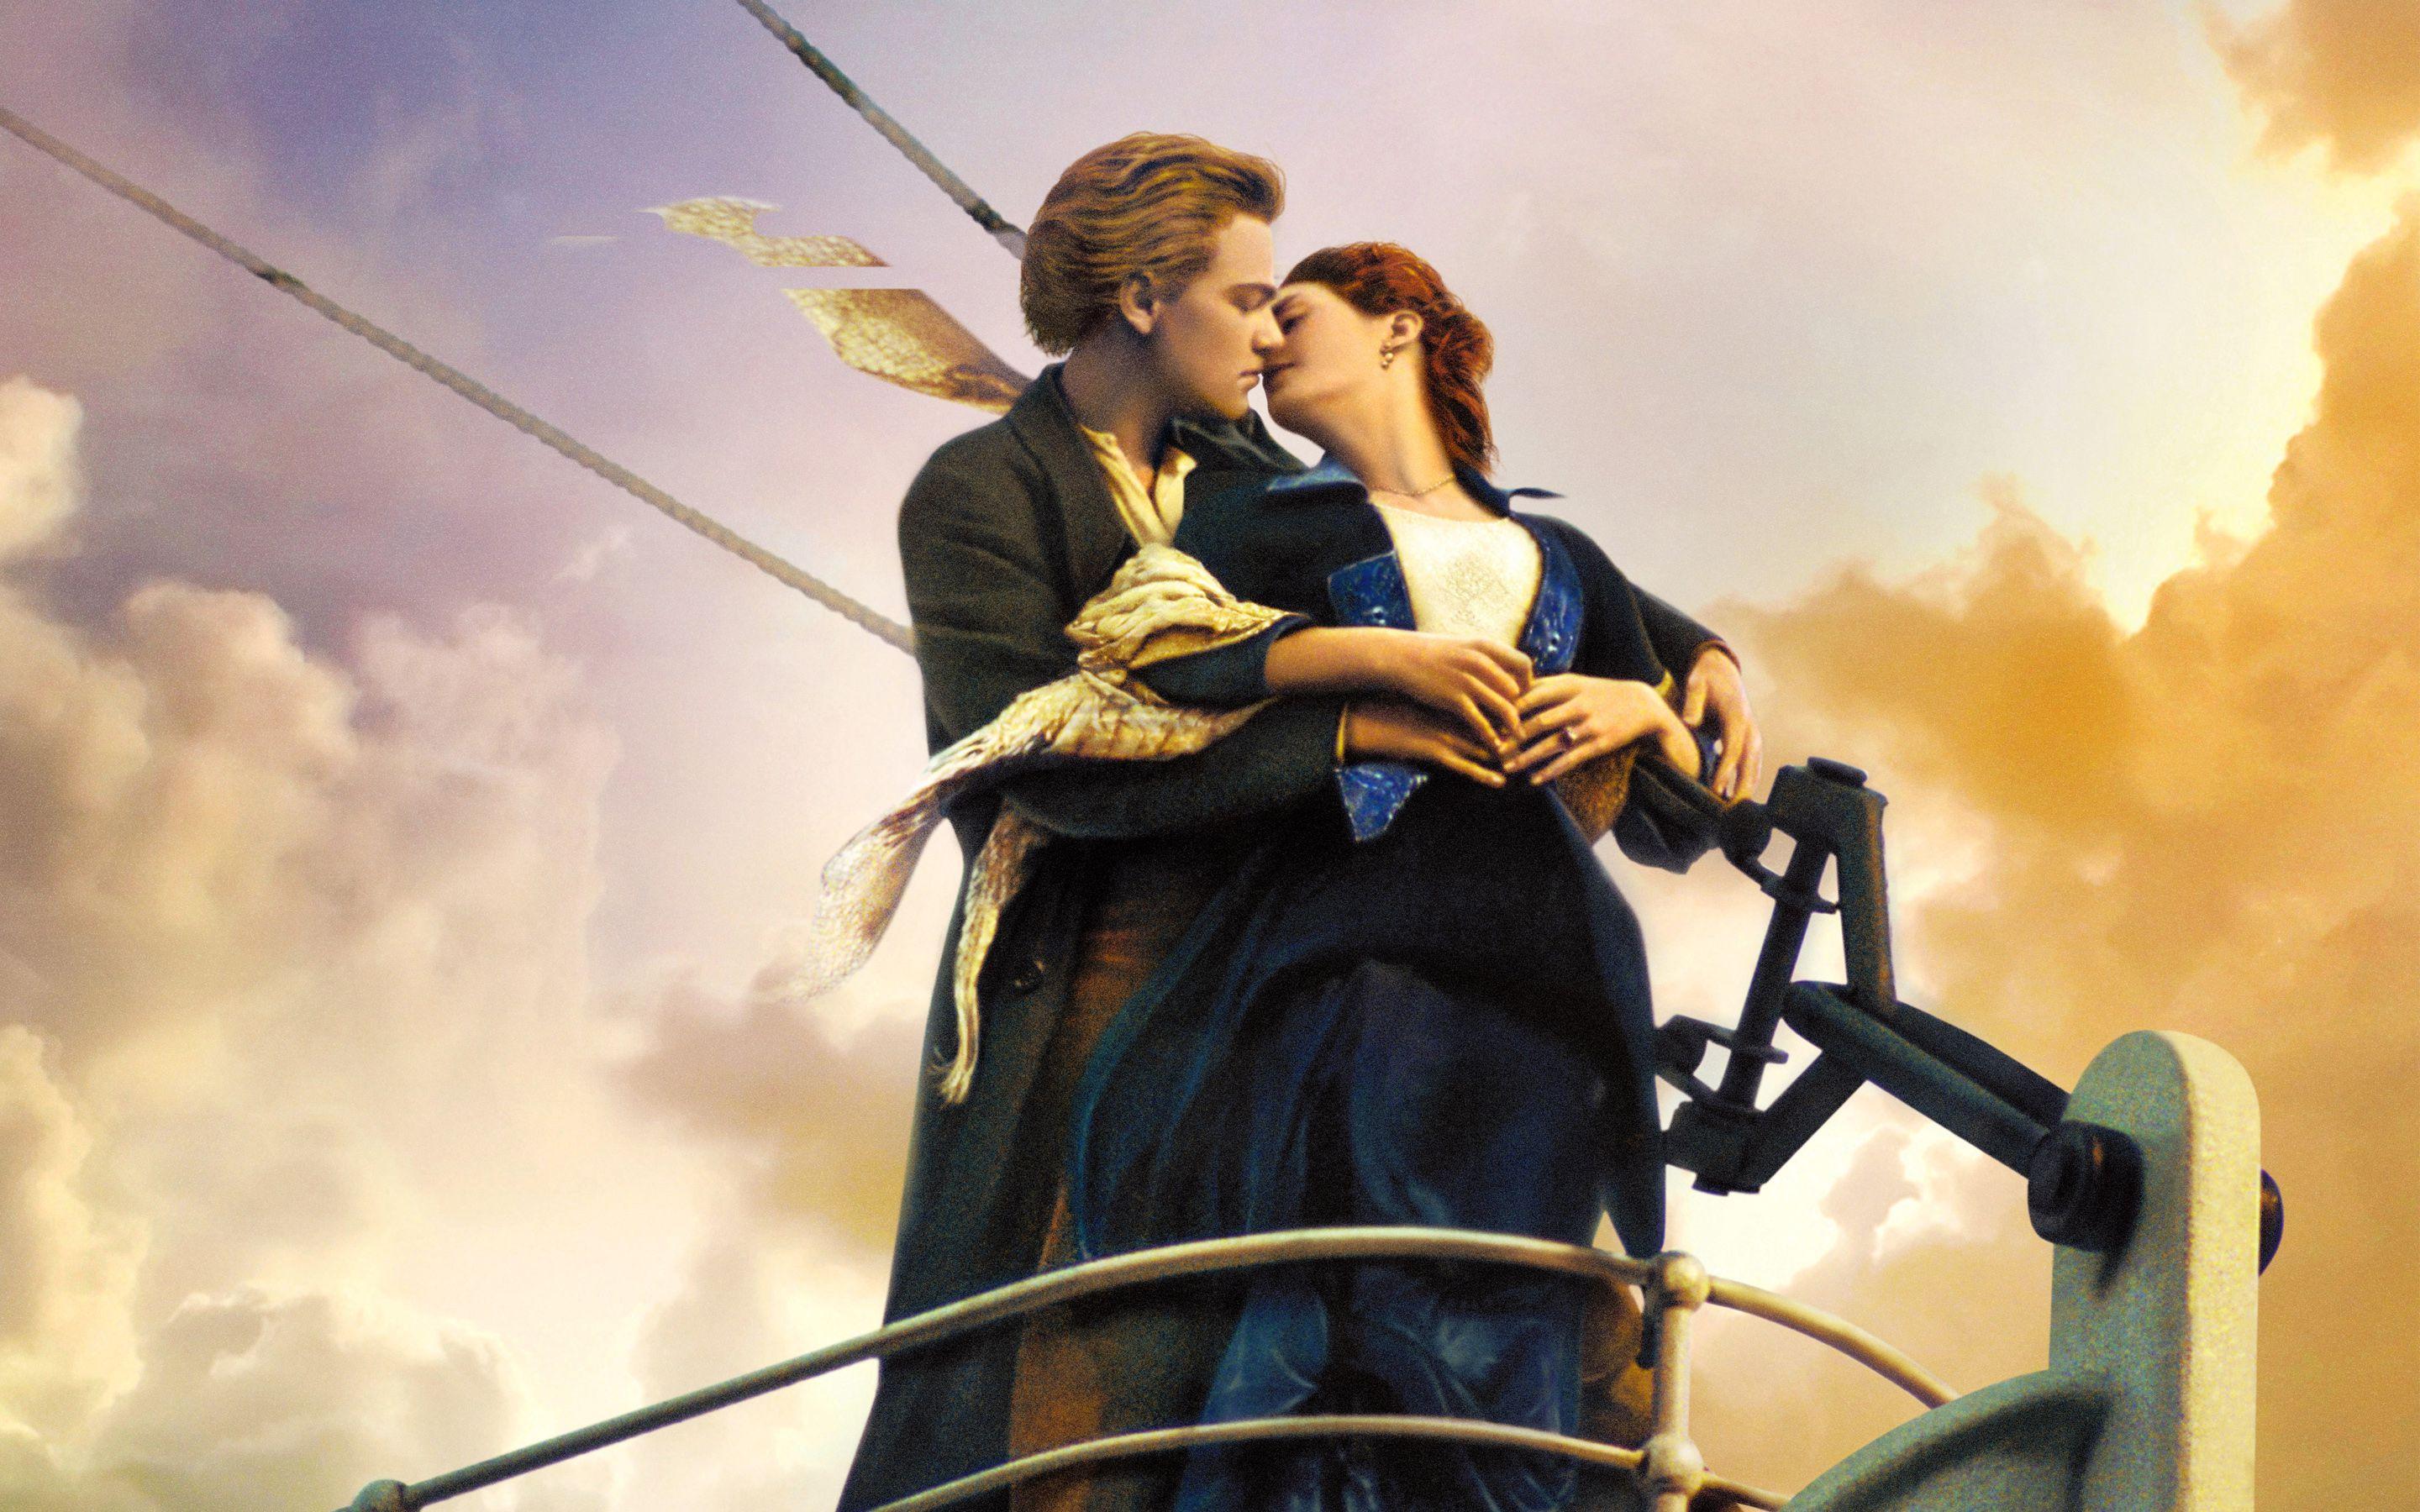 Jack And Rose Romantic HD Wallpaper From Titanic Movie